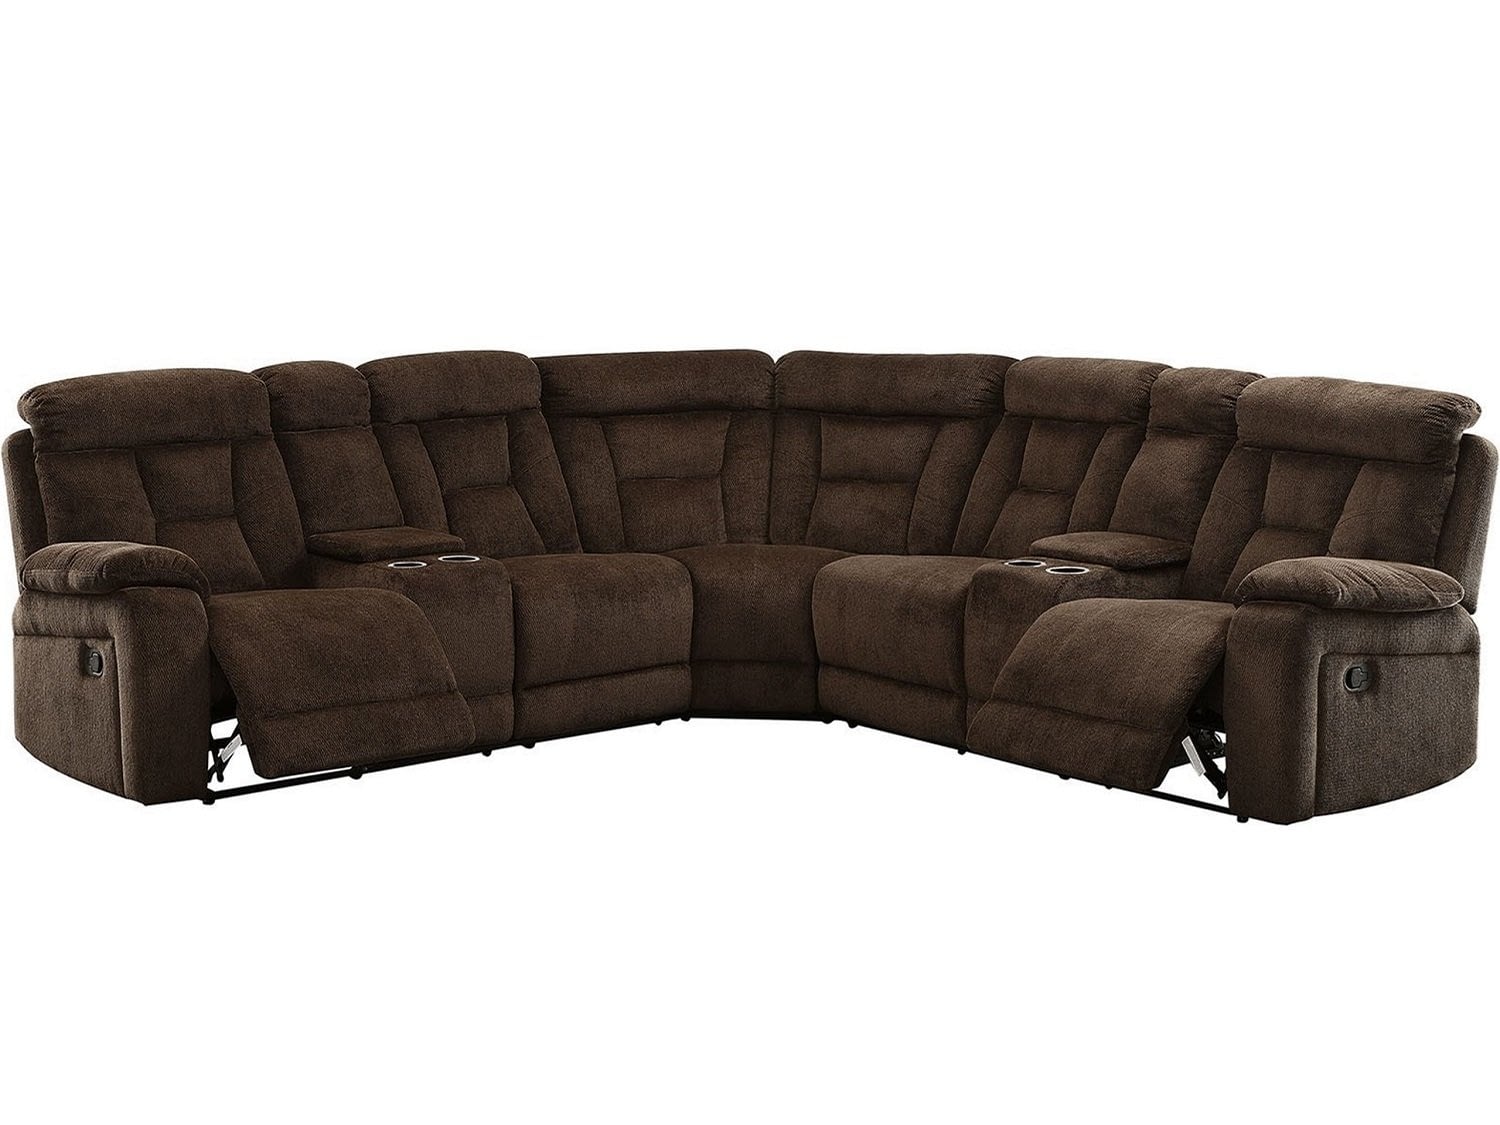 OTISFIELD Reclining Sectional - Zoom